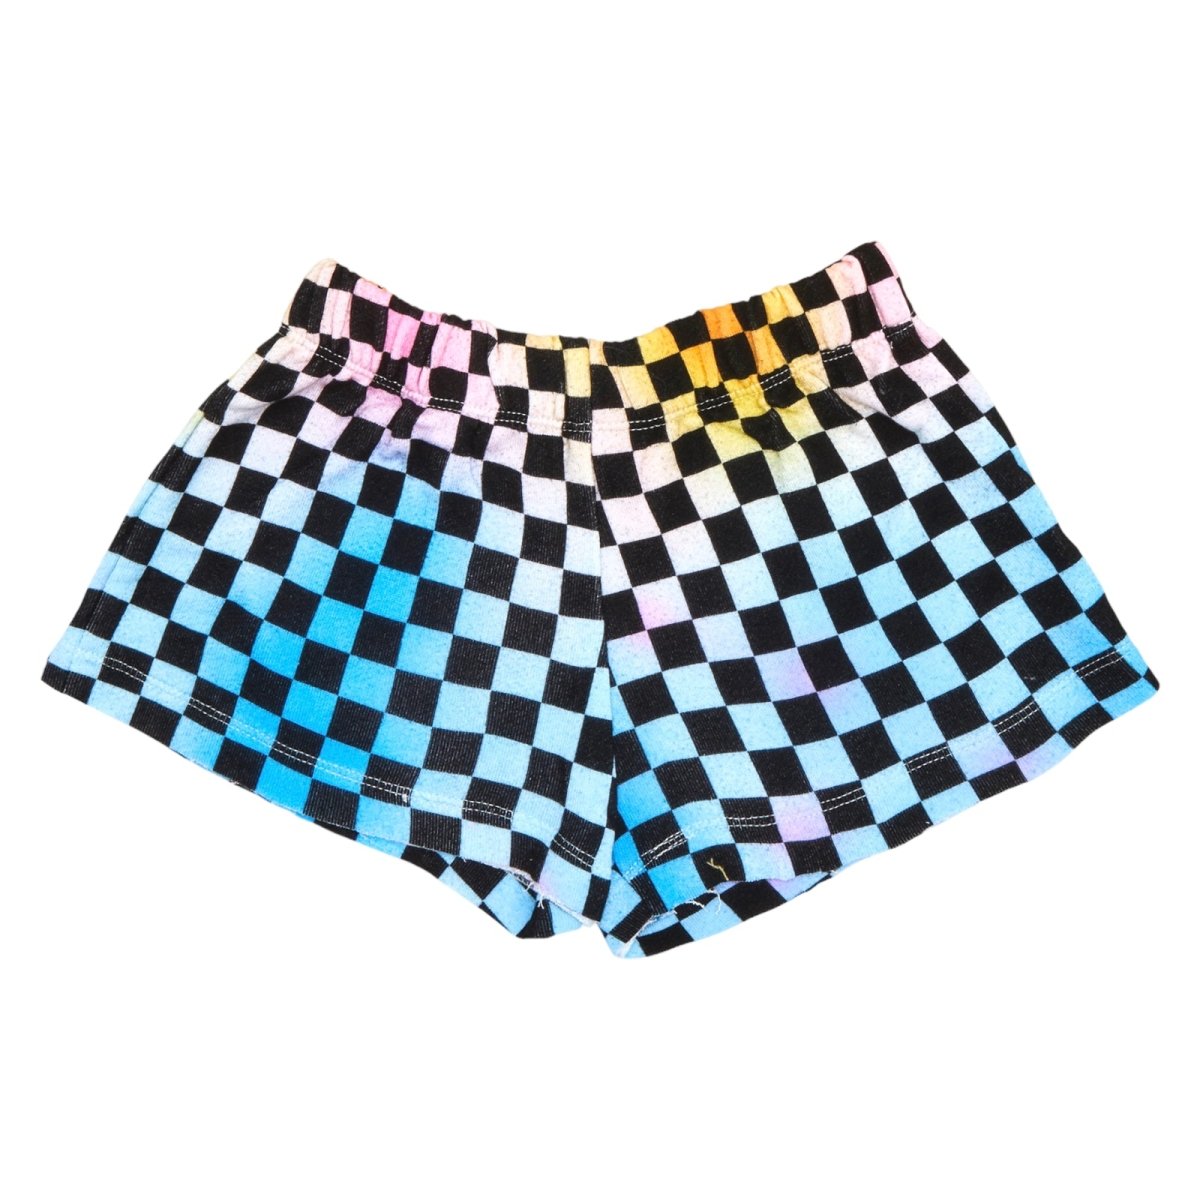 PASTEL CHECKERED SHORTS - FLOWERS BY ZOE